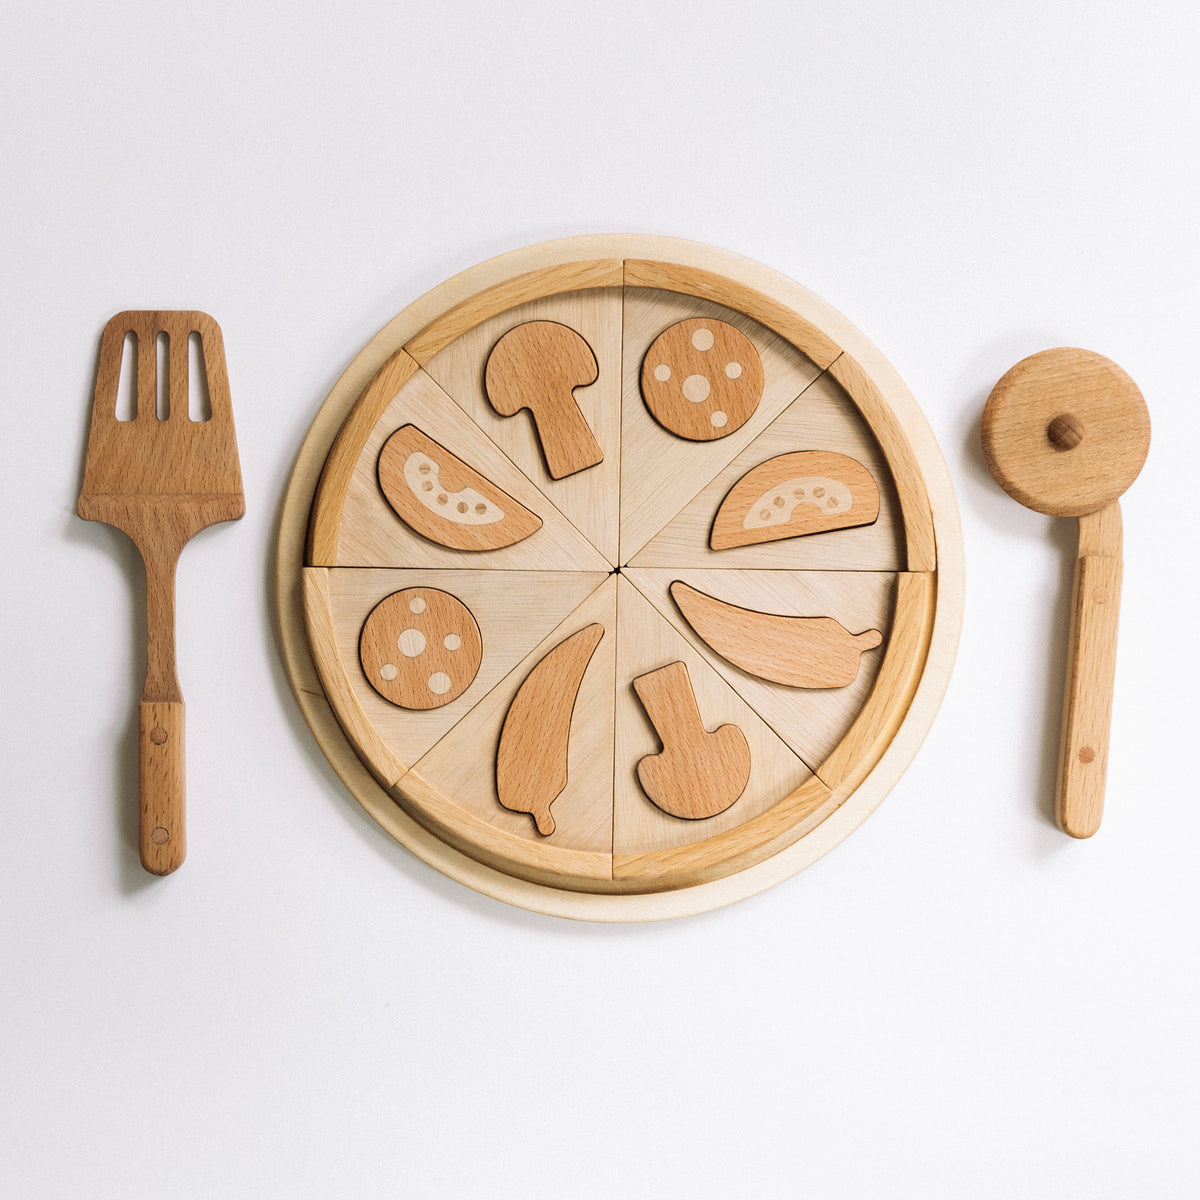 Wooden Pizza Play Food - Pizza Puzzle Play Set — Oak & Ever